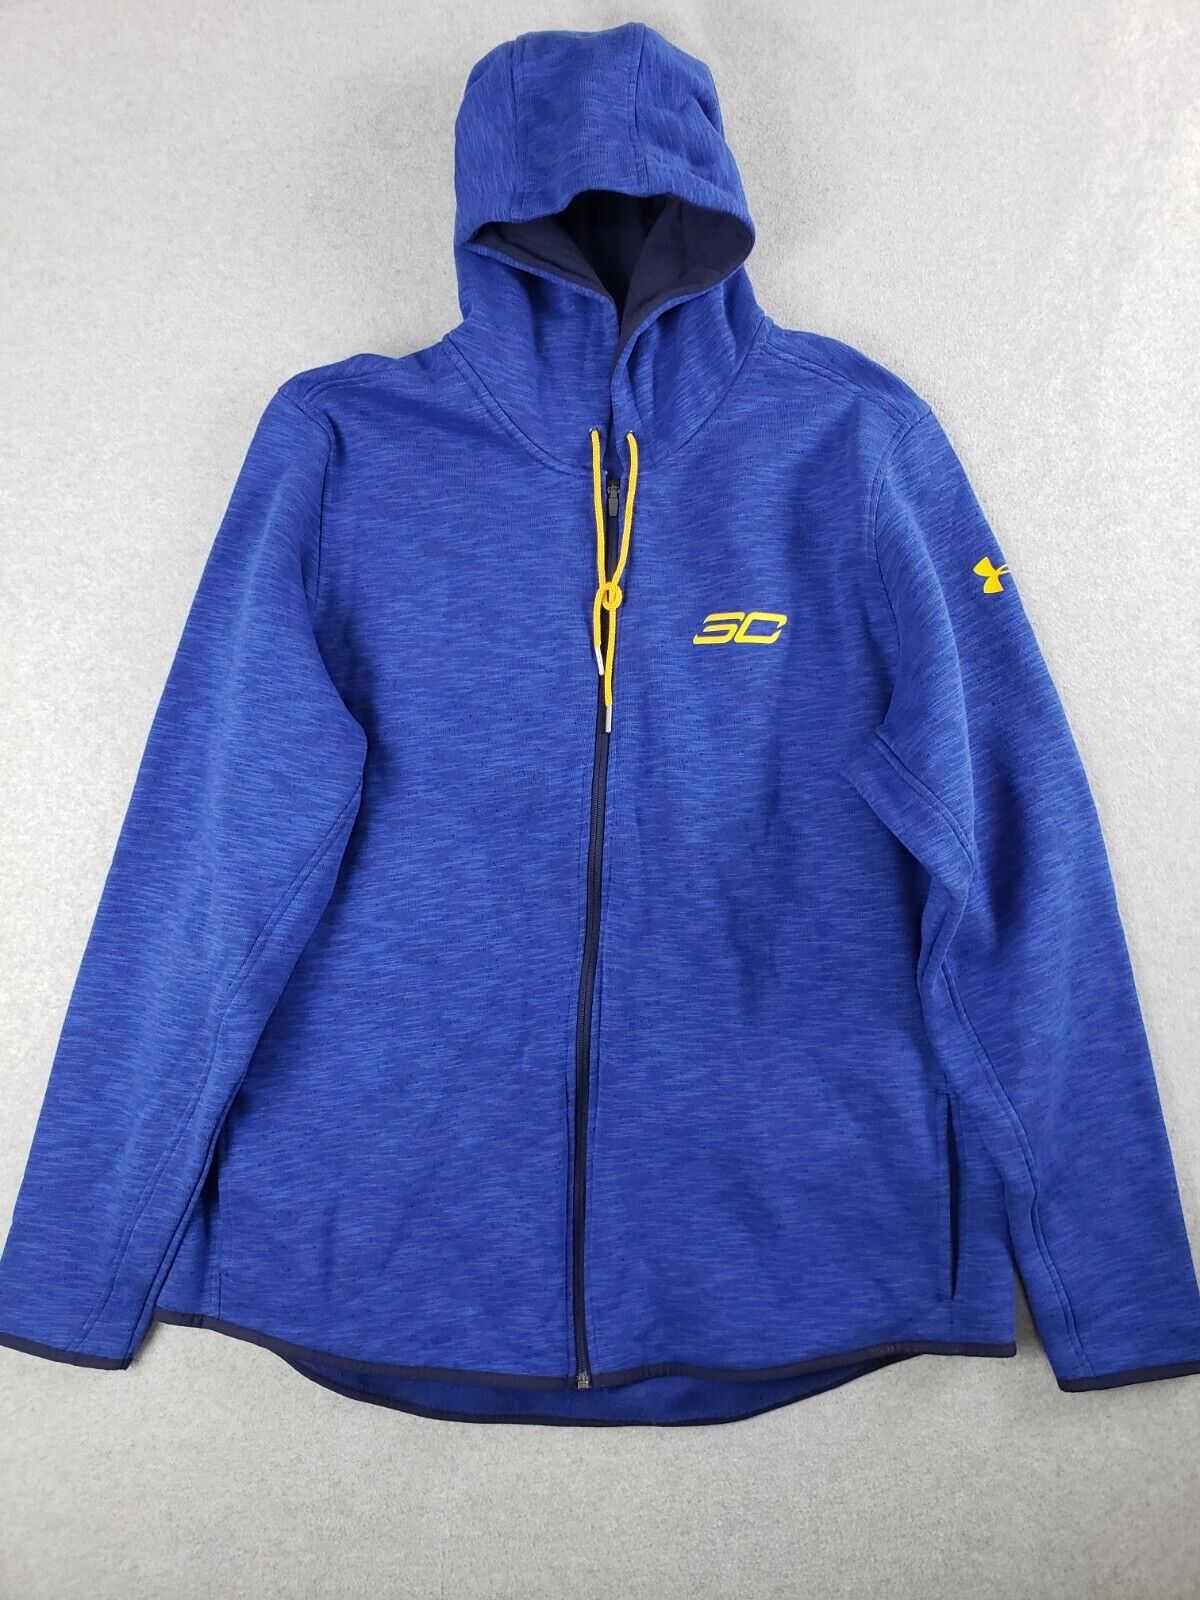 New Under Armour Steph Curry Fleece Pullover Hoodie Sweater Size